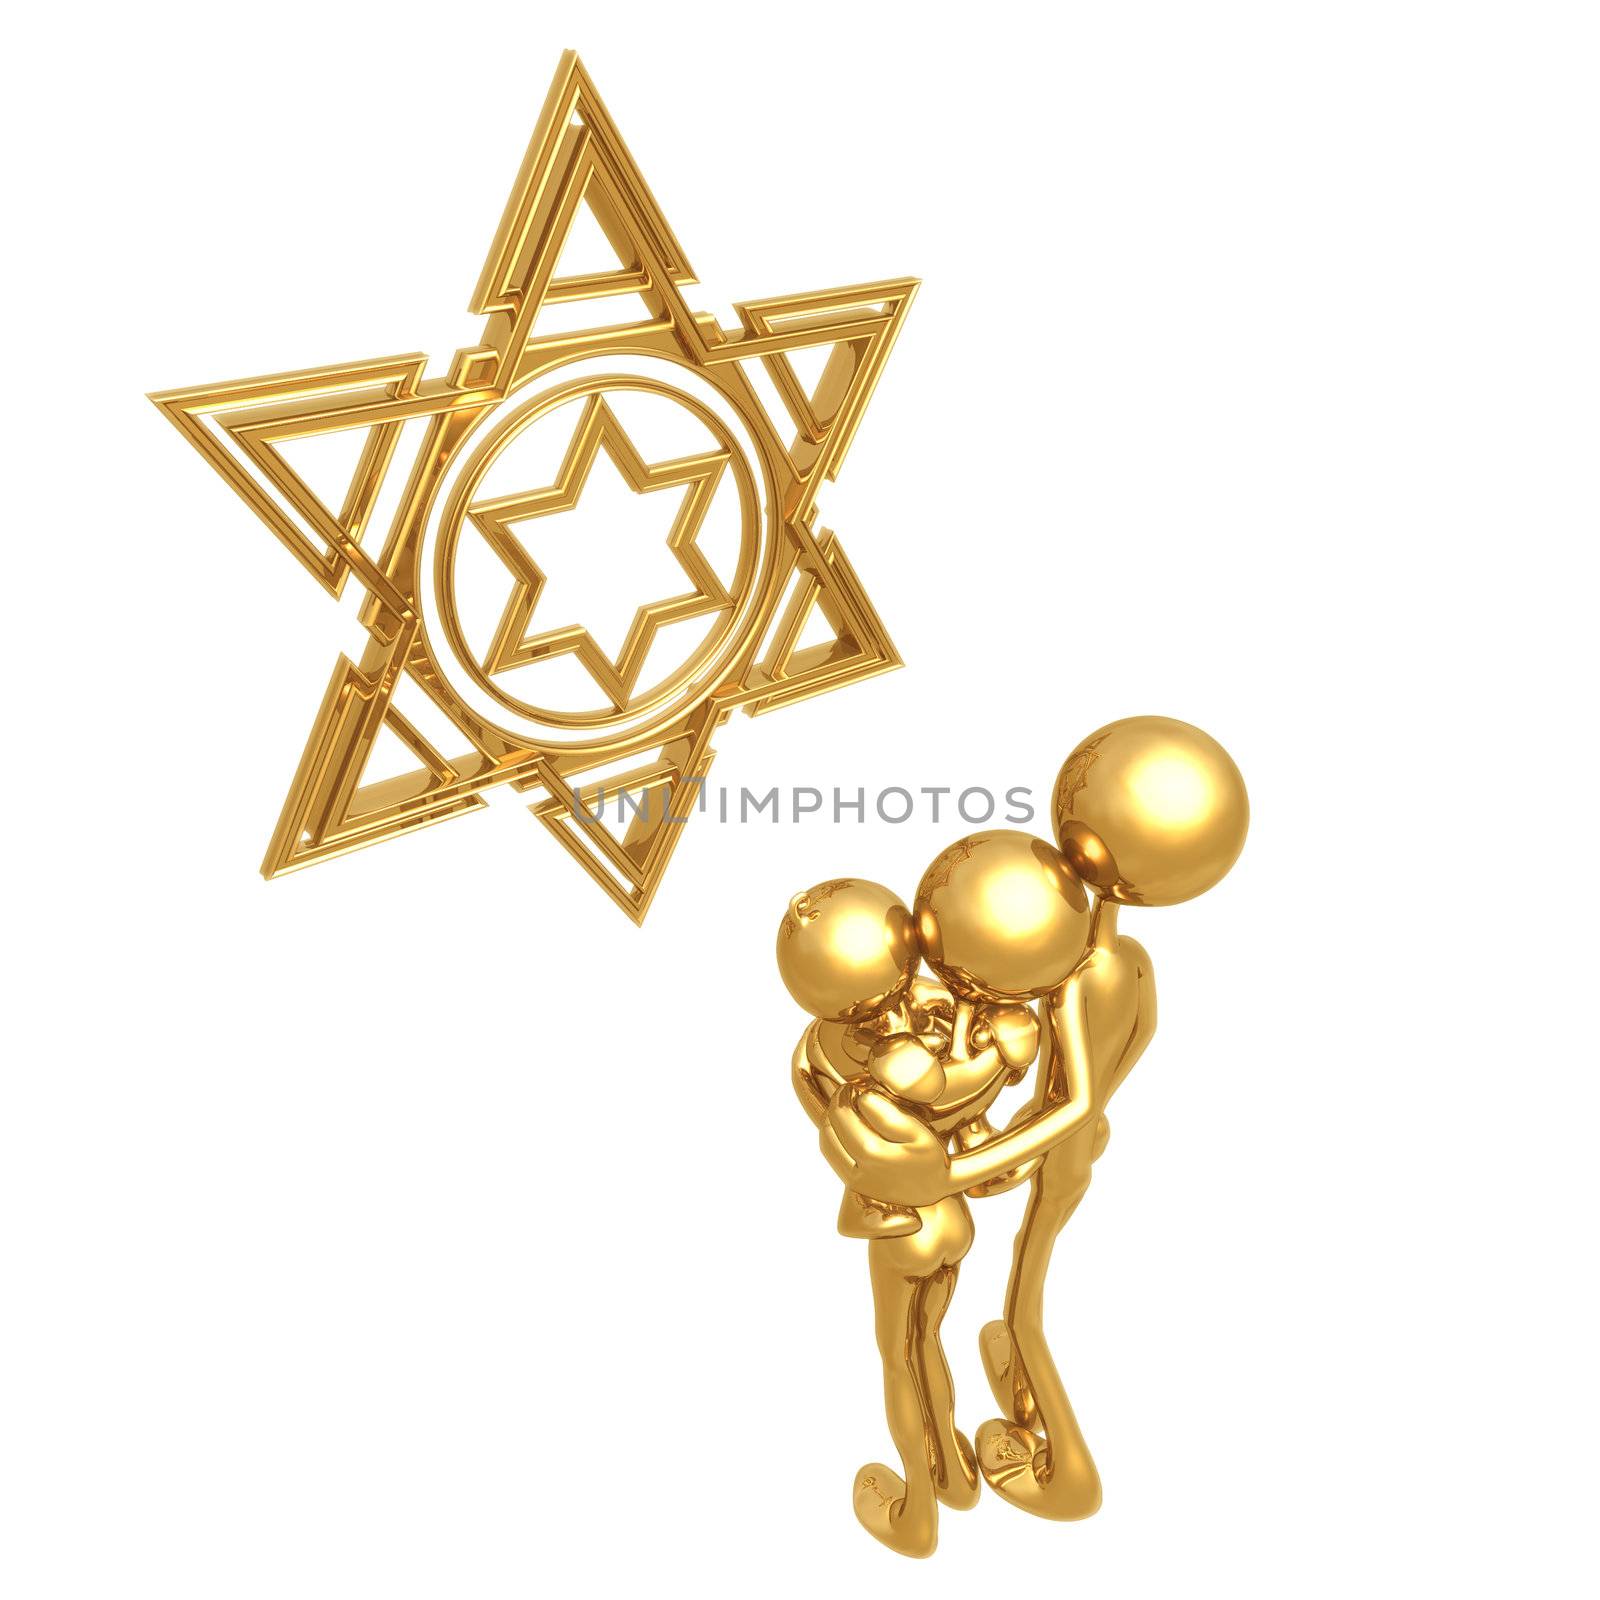  Golden Family With Star of David by LuMaxArt